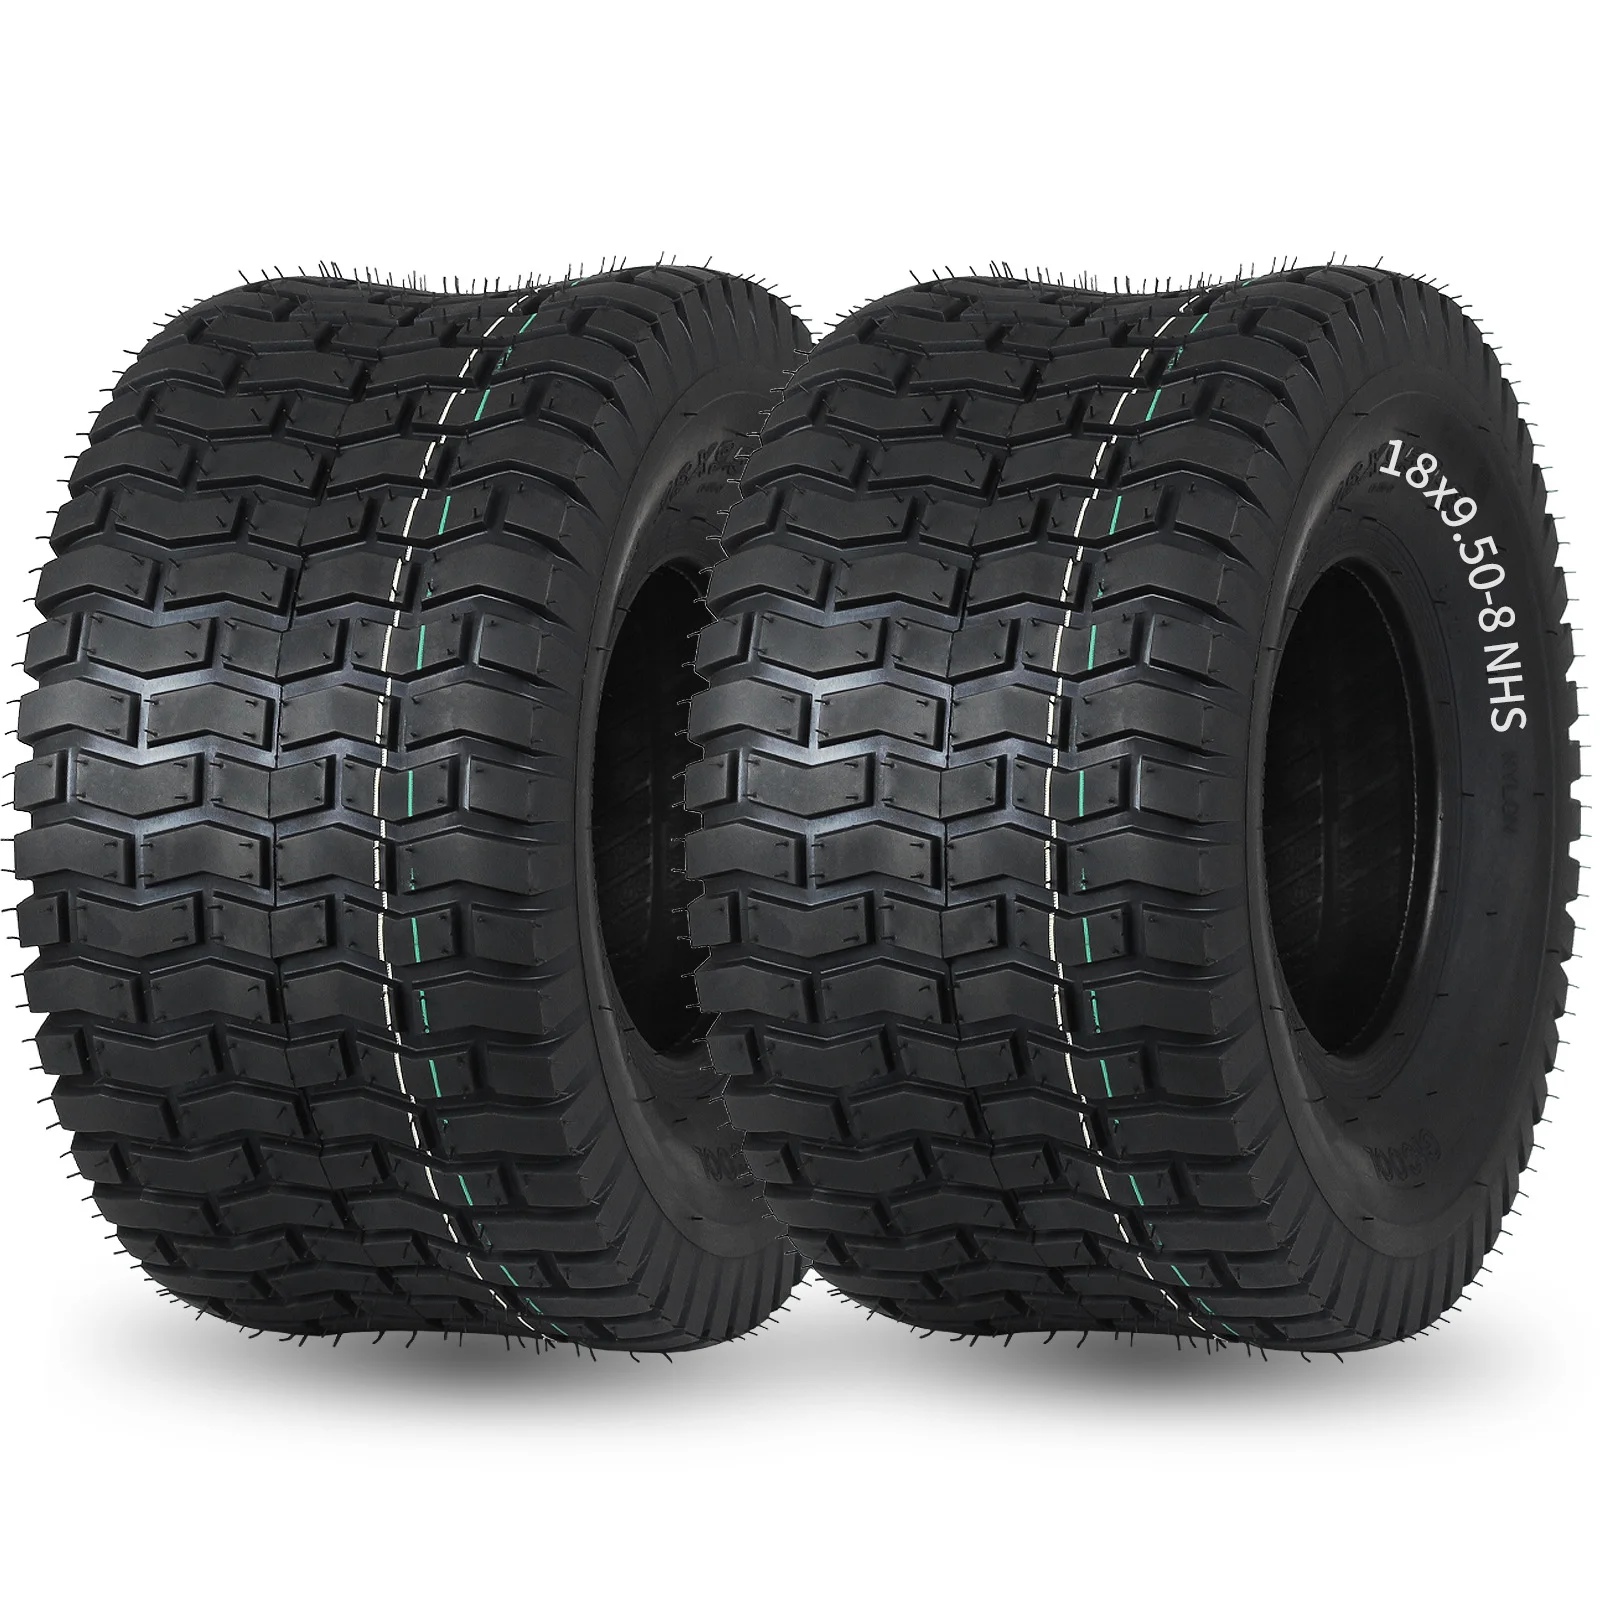 18 x 9.50-8 Turf-V Pattern Lawnmower Tire, 18x9.5-8 for Tractor Riding Lawnmowers